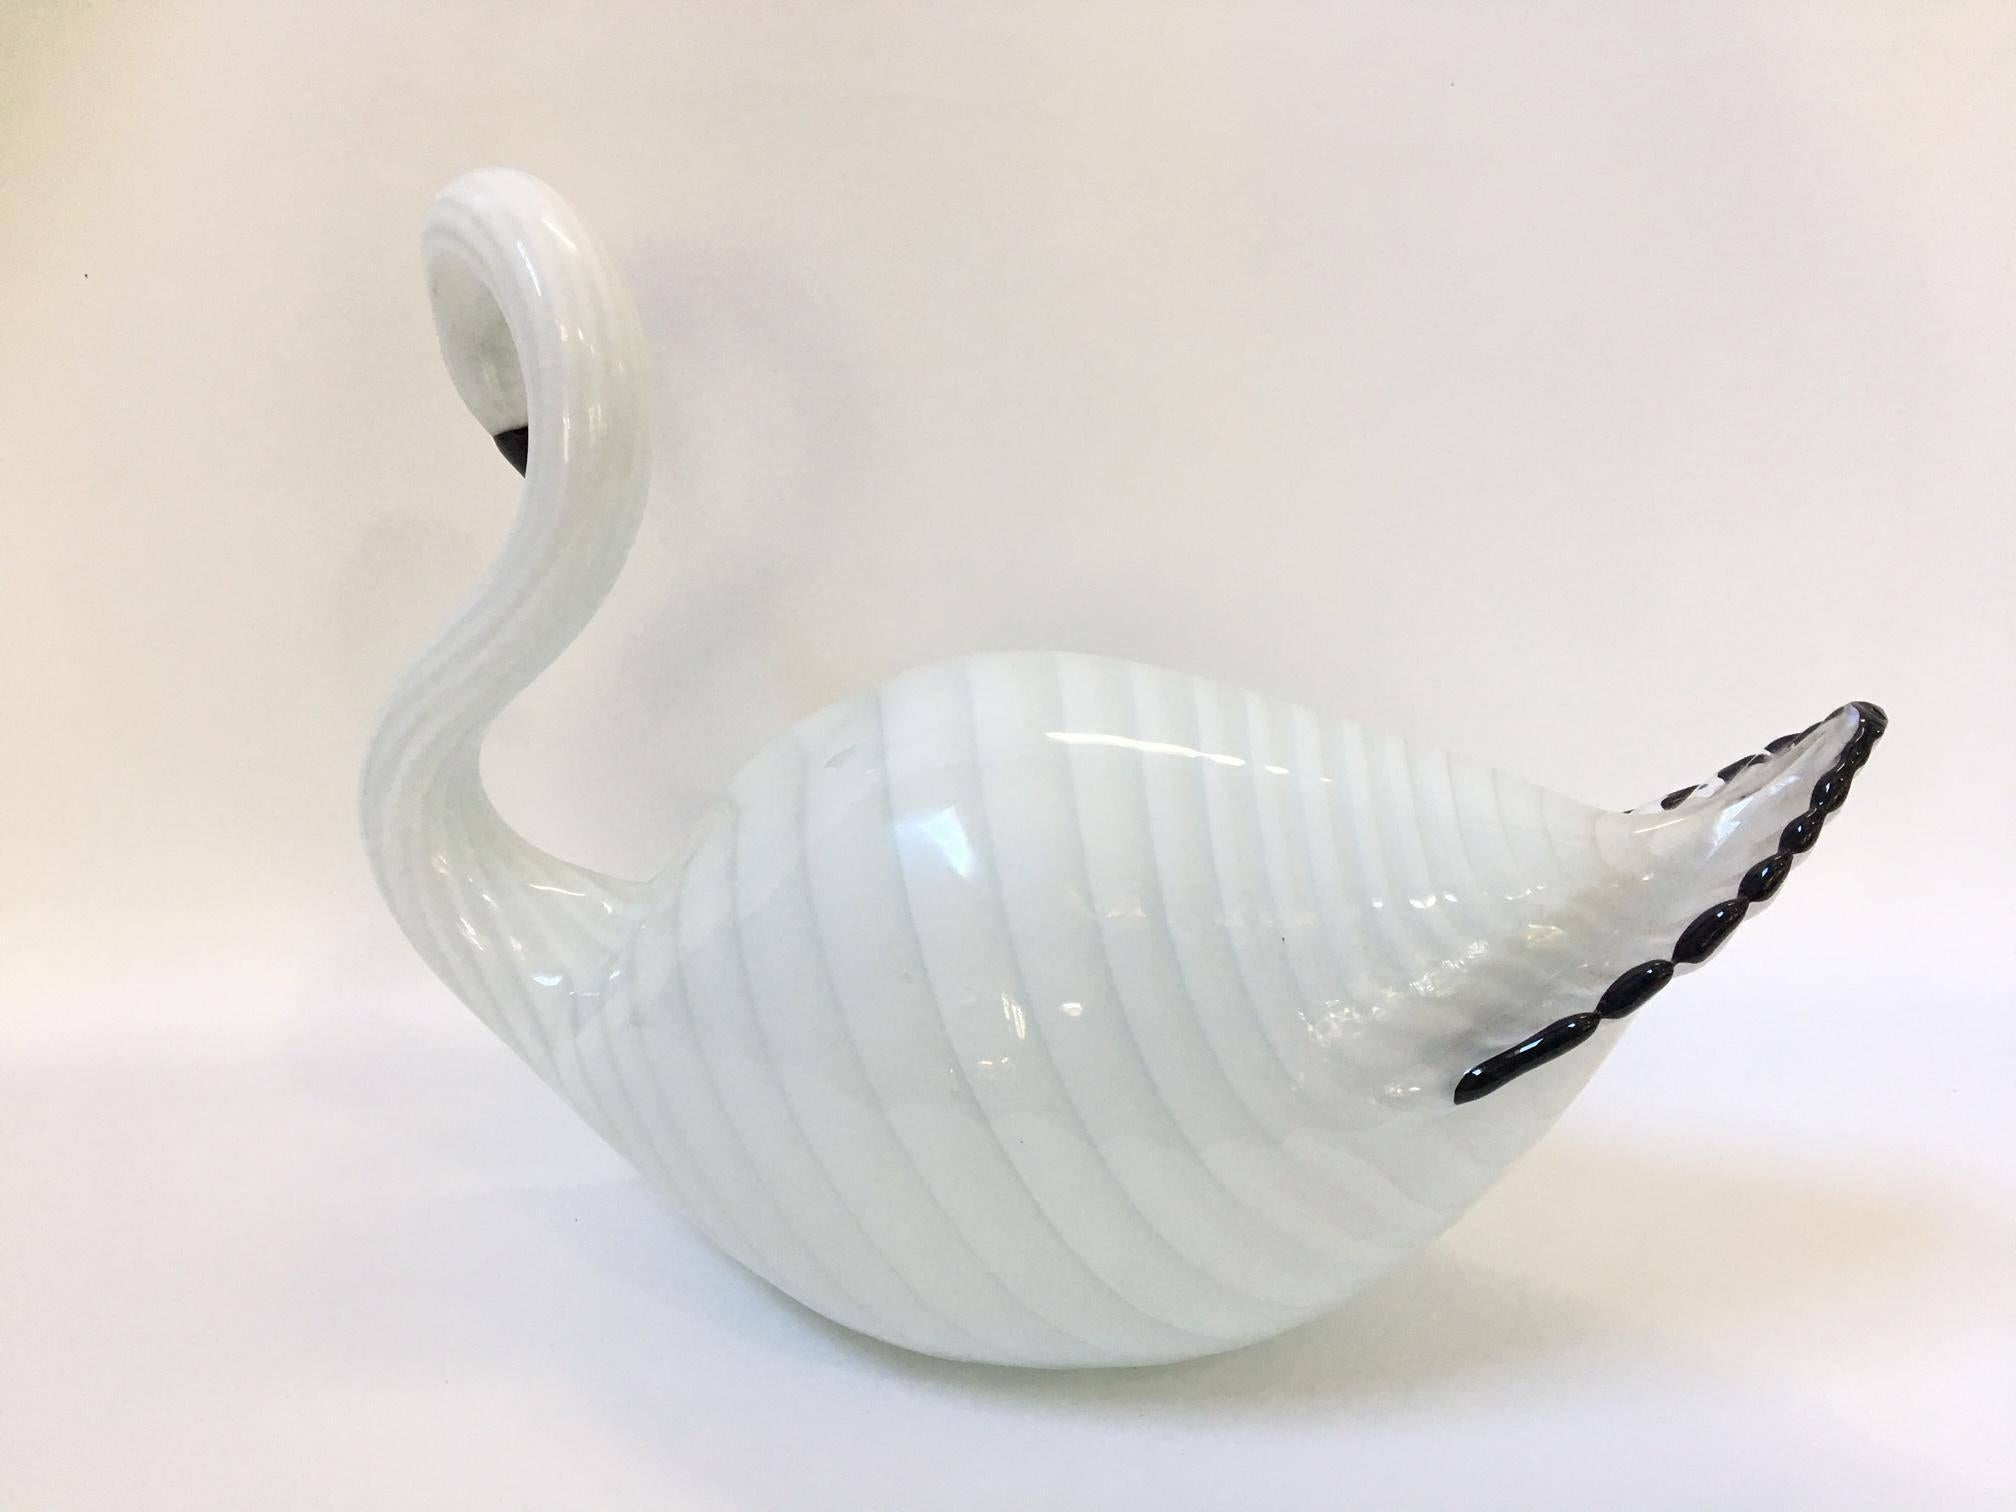 Large art glass swan sculpture by Murano. Maker's mark is present. Reads 